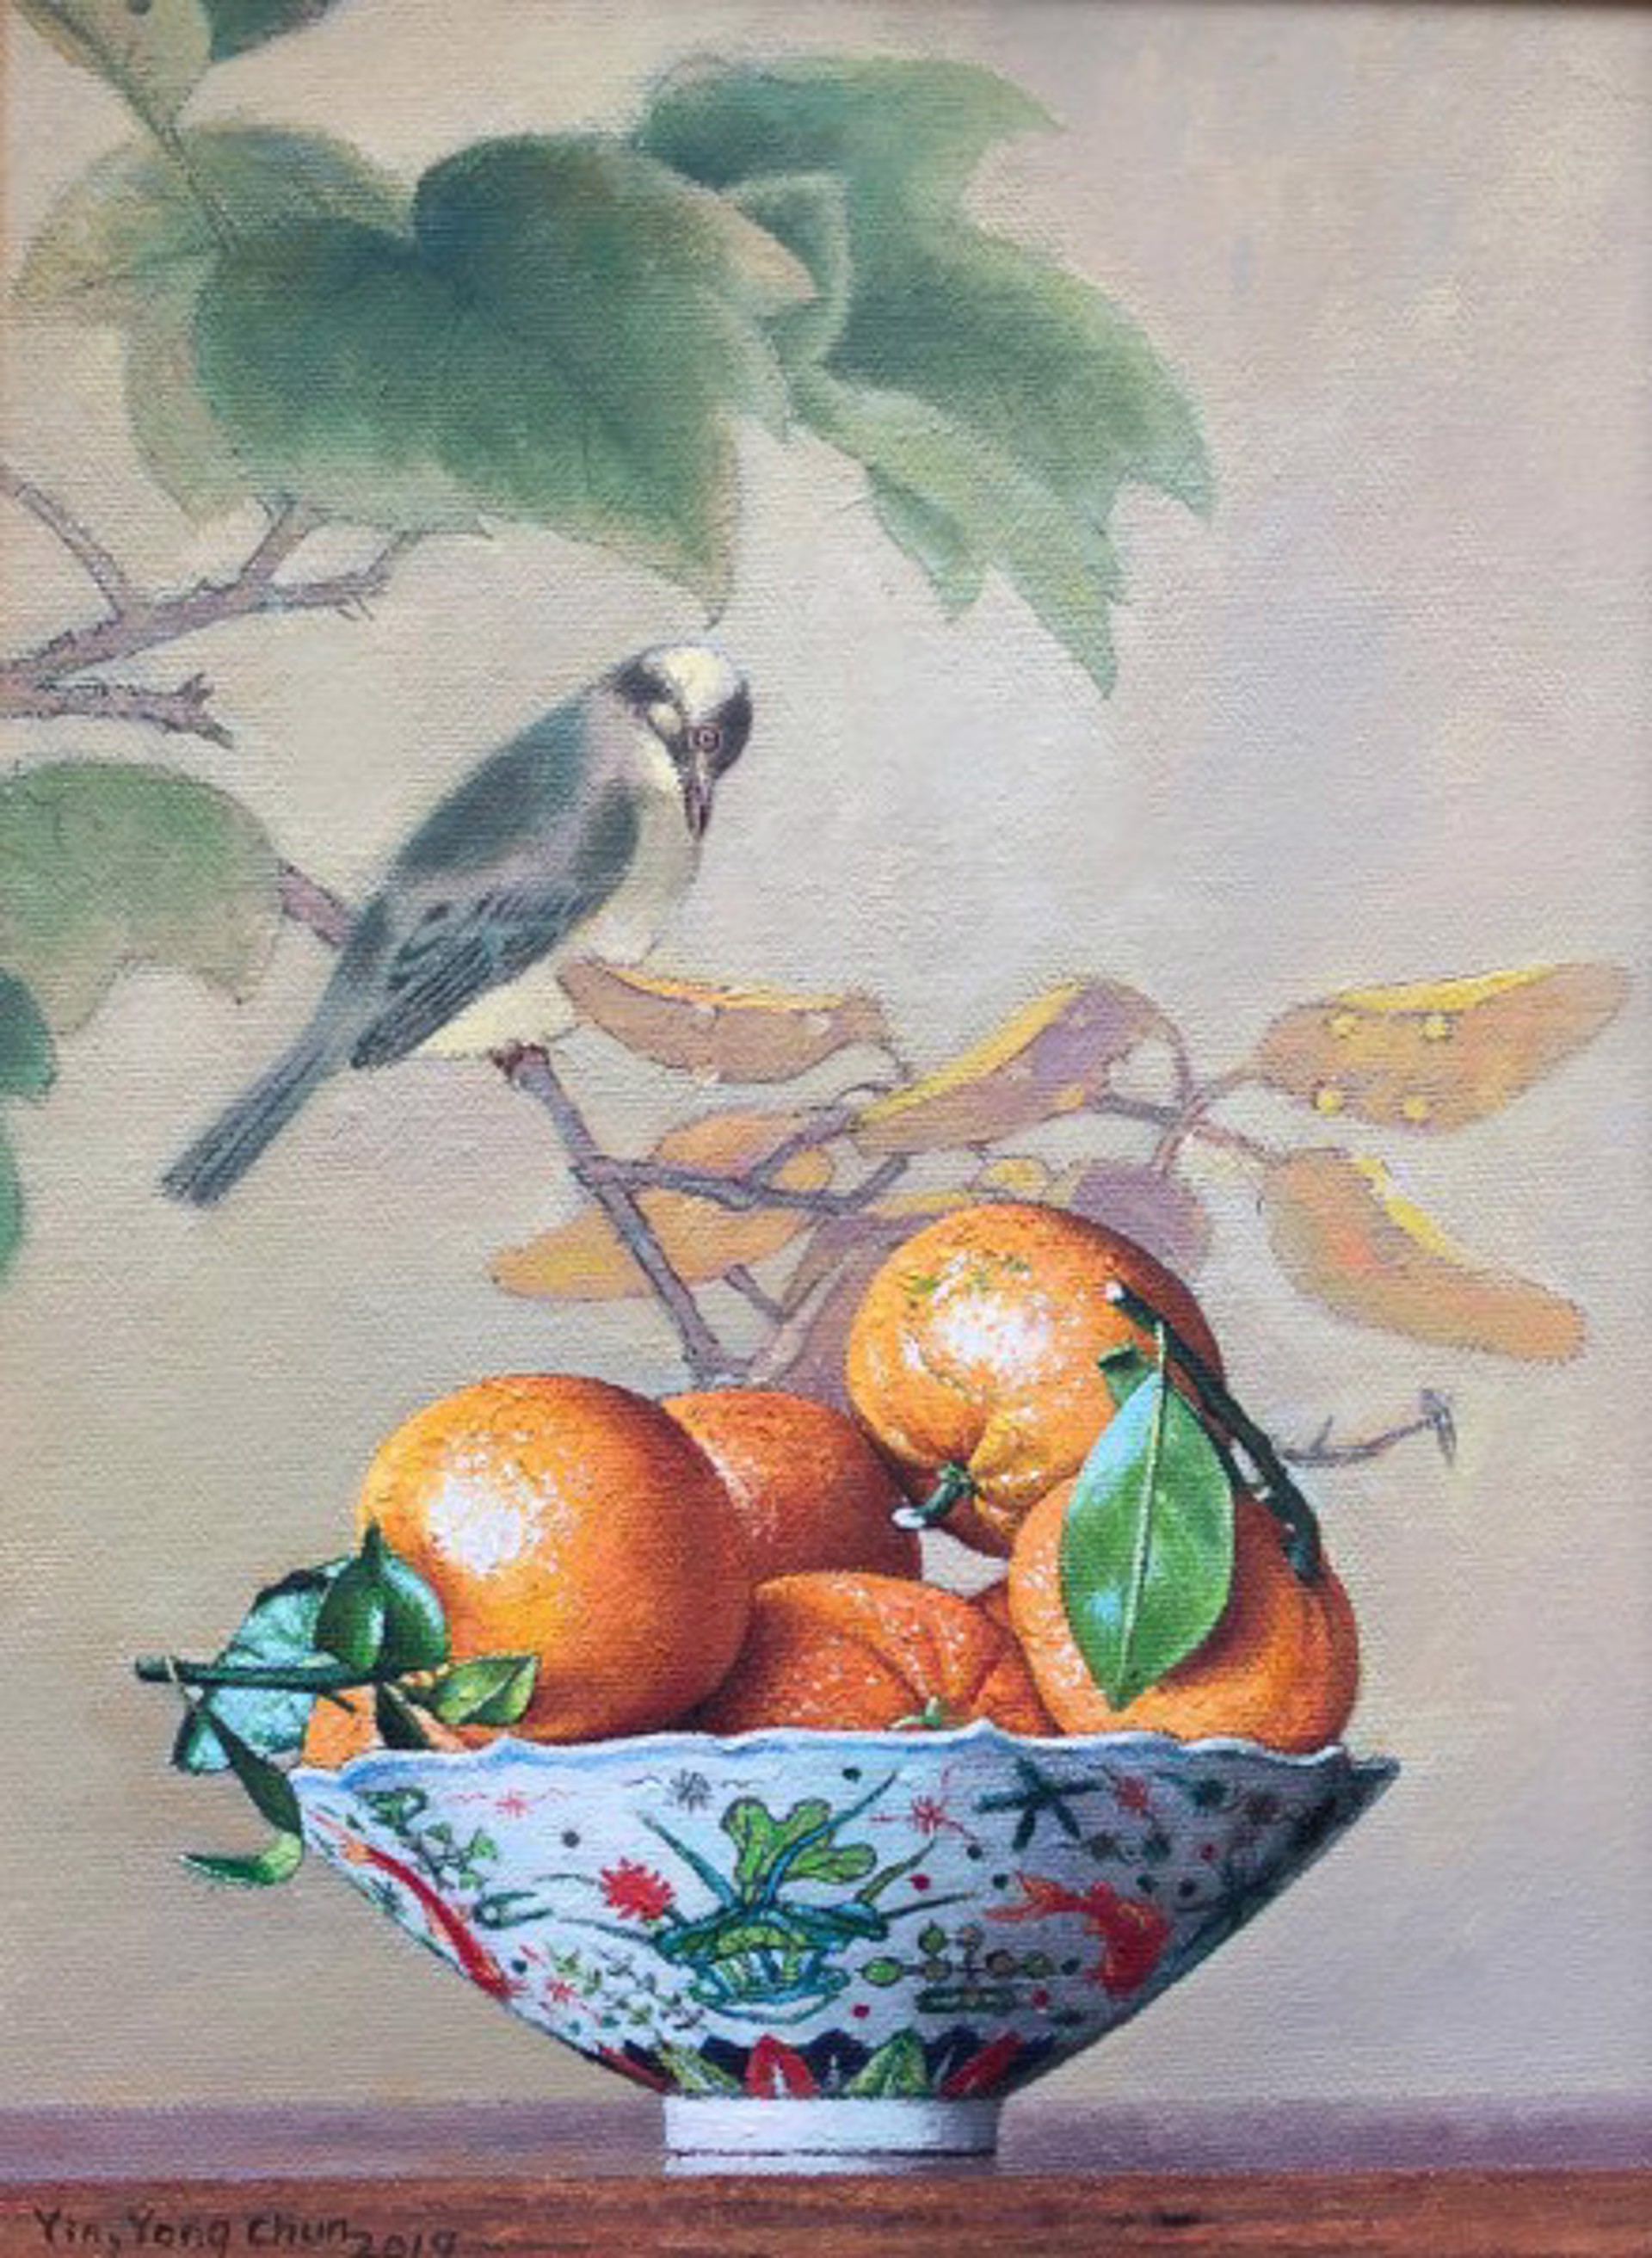 One Bird and a Bowl of Oranges by Yin Yong Chun